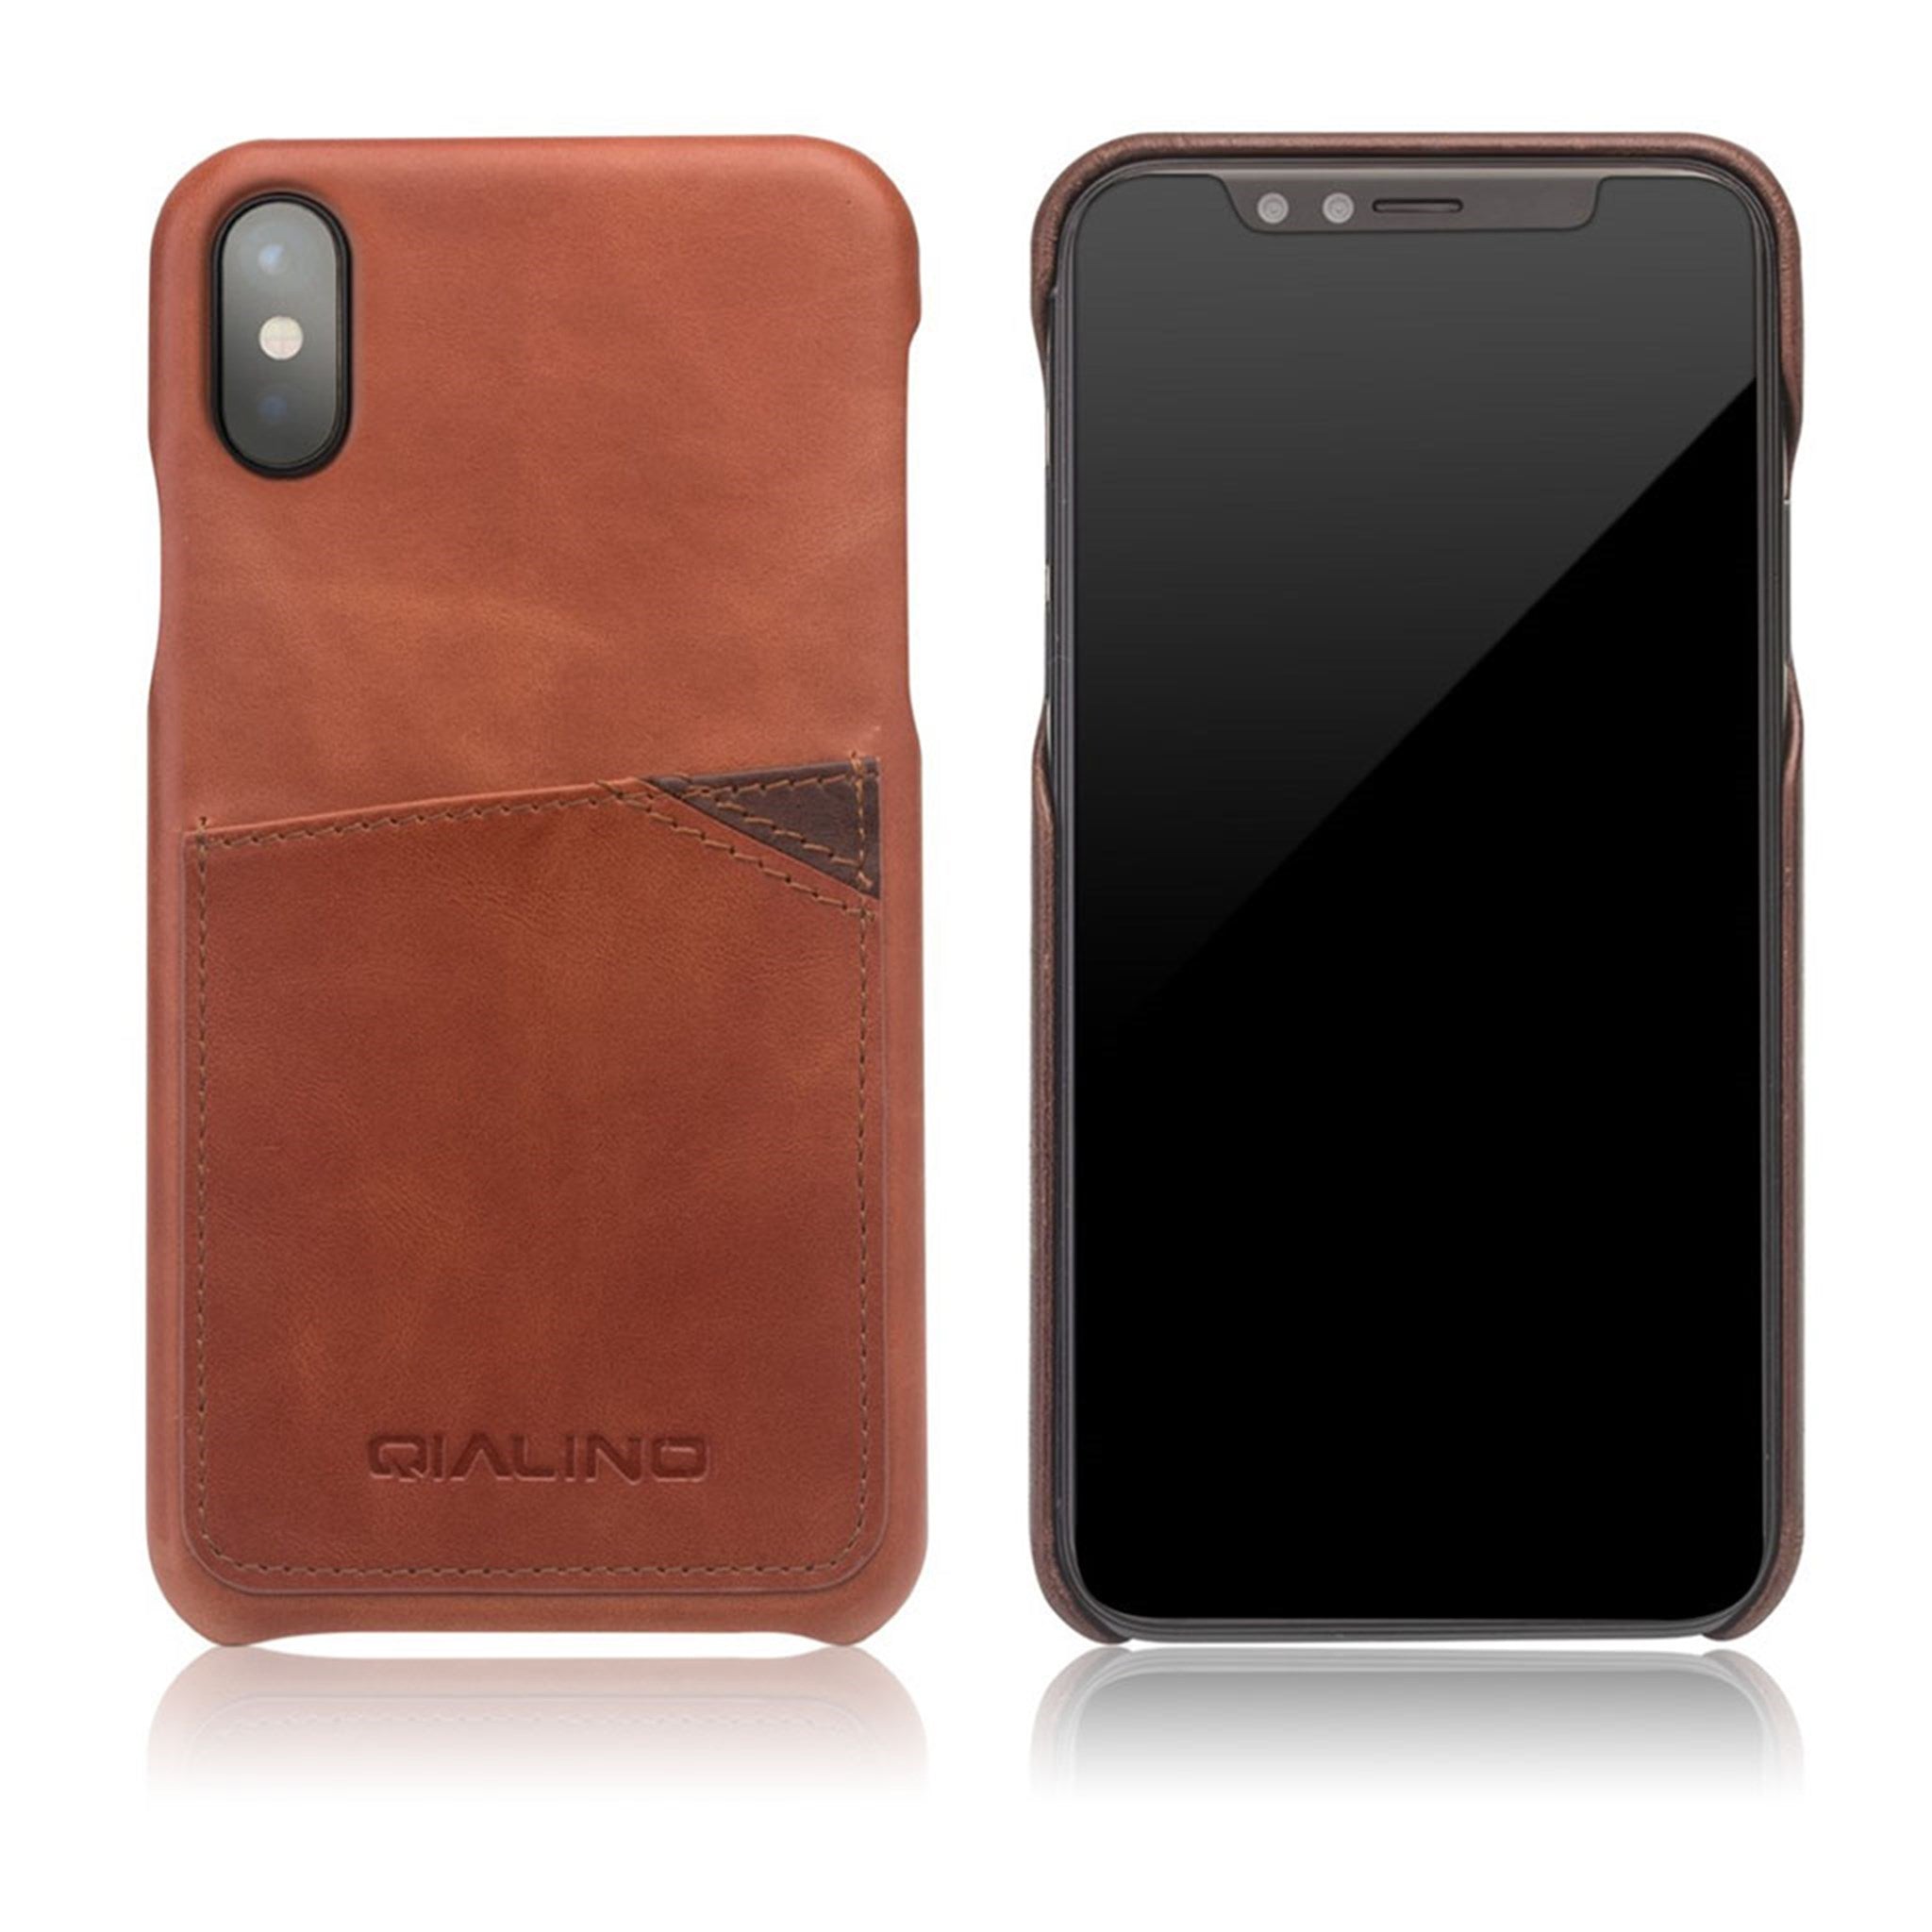 QIALINO iPhone X cowhide leather case - Brown